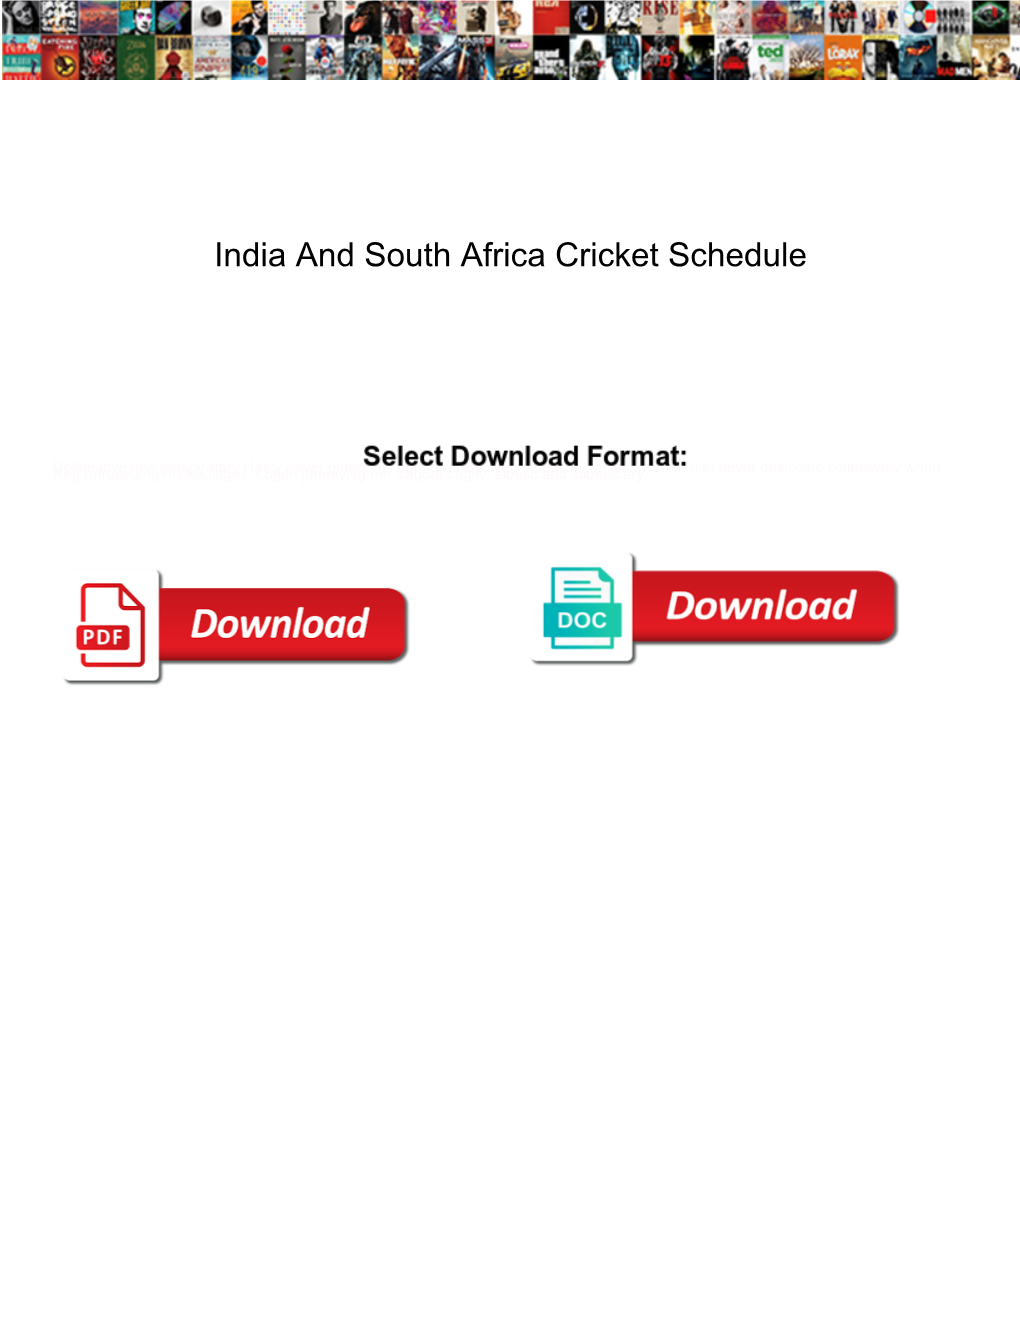 India and South Africa Cricket Schedule